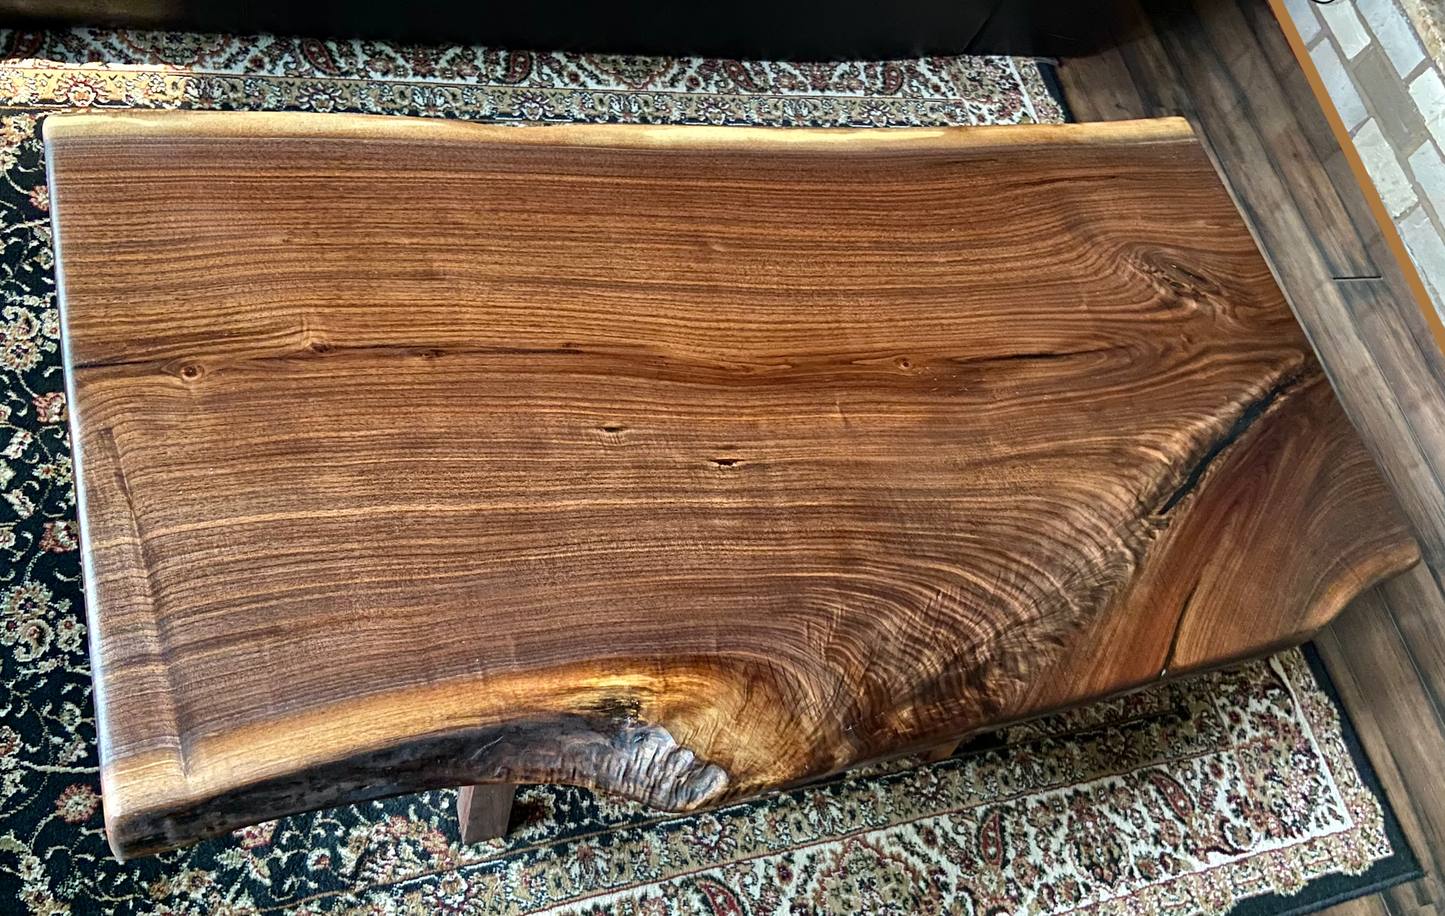 Wider Natural Live Edge Walnut Coffee Table with Stunning Fiddleback and Feathered Grain Patterns